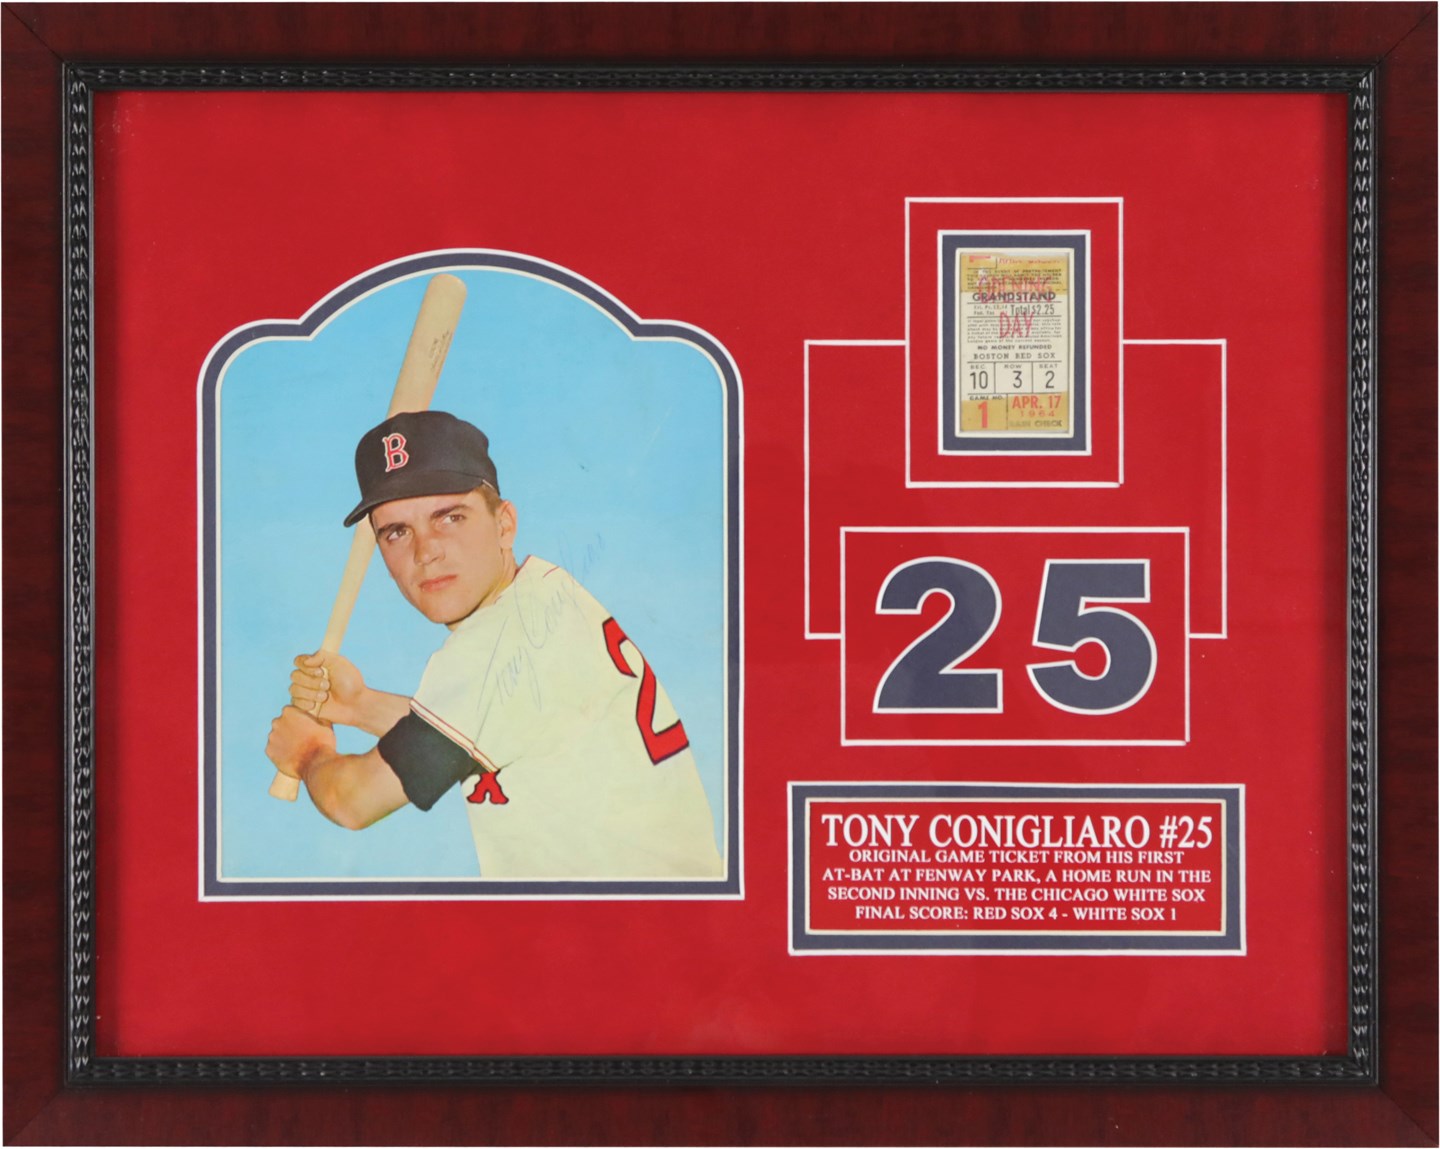 - Tony Conigliaro Fenway Park Debut & 1st Home Run Ticket Stub with Signed Photo Display (PSA)